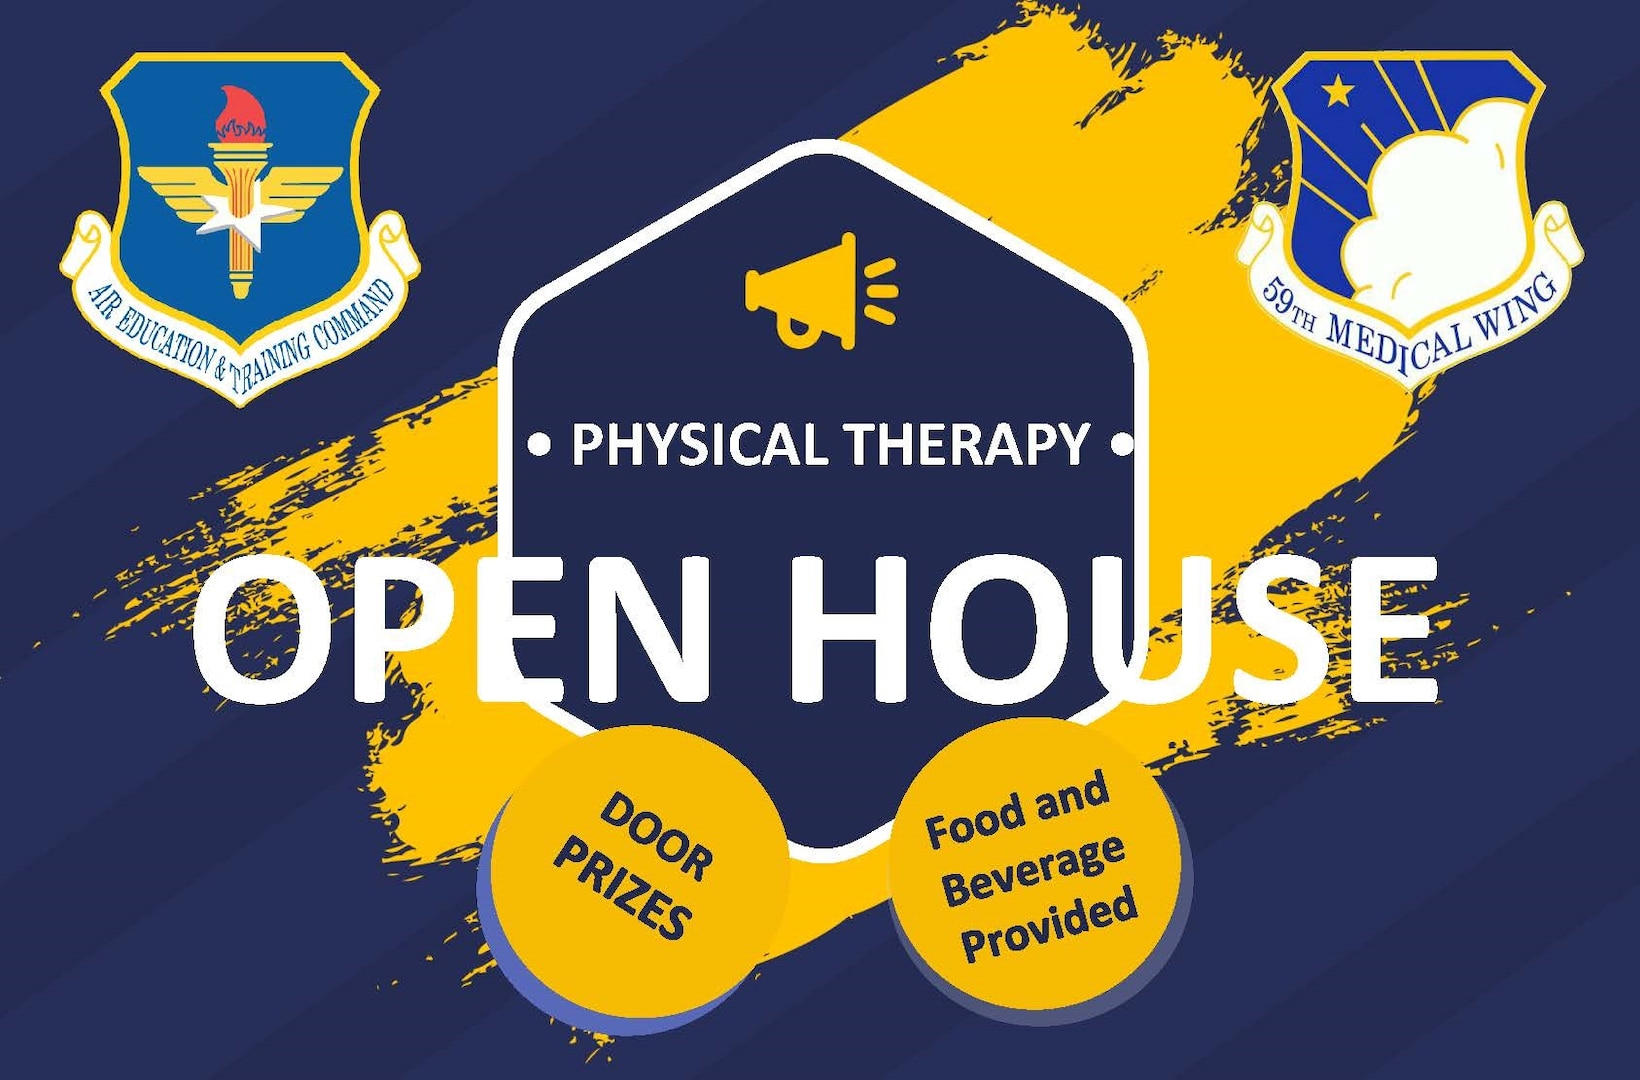 The 59th Medical Wing Physical Therapy Clinic, located on the third floor C wing at Wilford Hall Ambulatory Surgical Center at Joint Base San Antonio-Lackland, is inviting all medical personnel and patients to an open house from 11 a.m. to 1 p.m. Oct. 25.